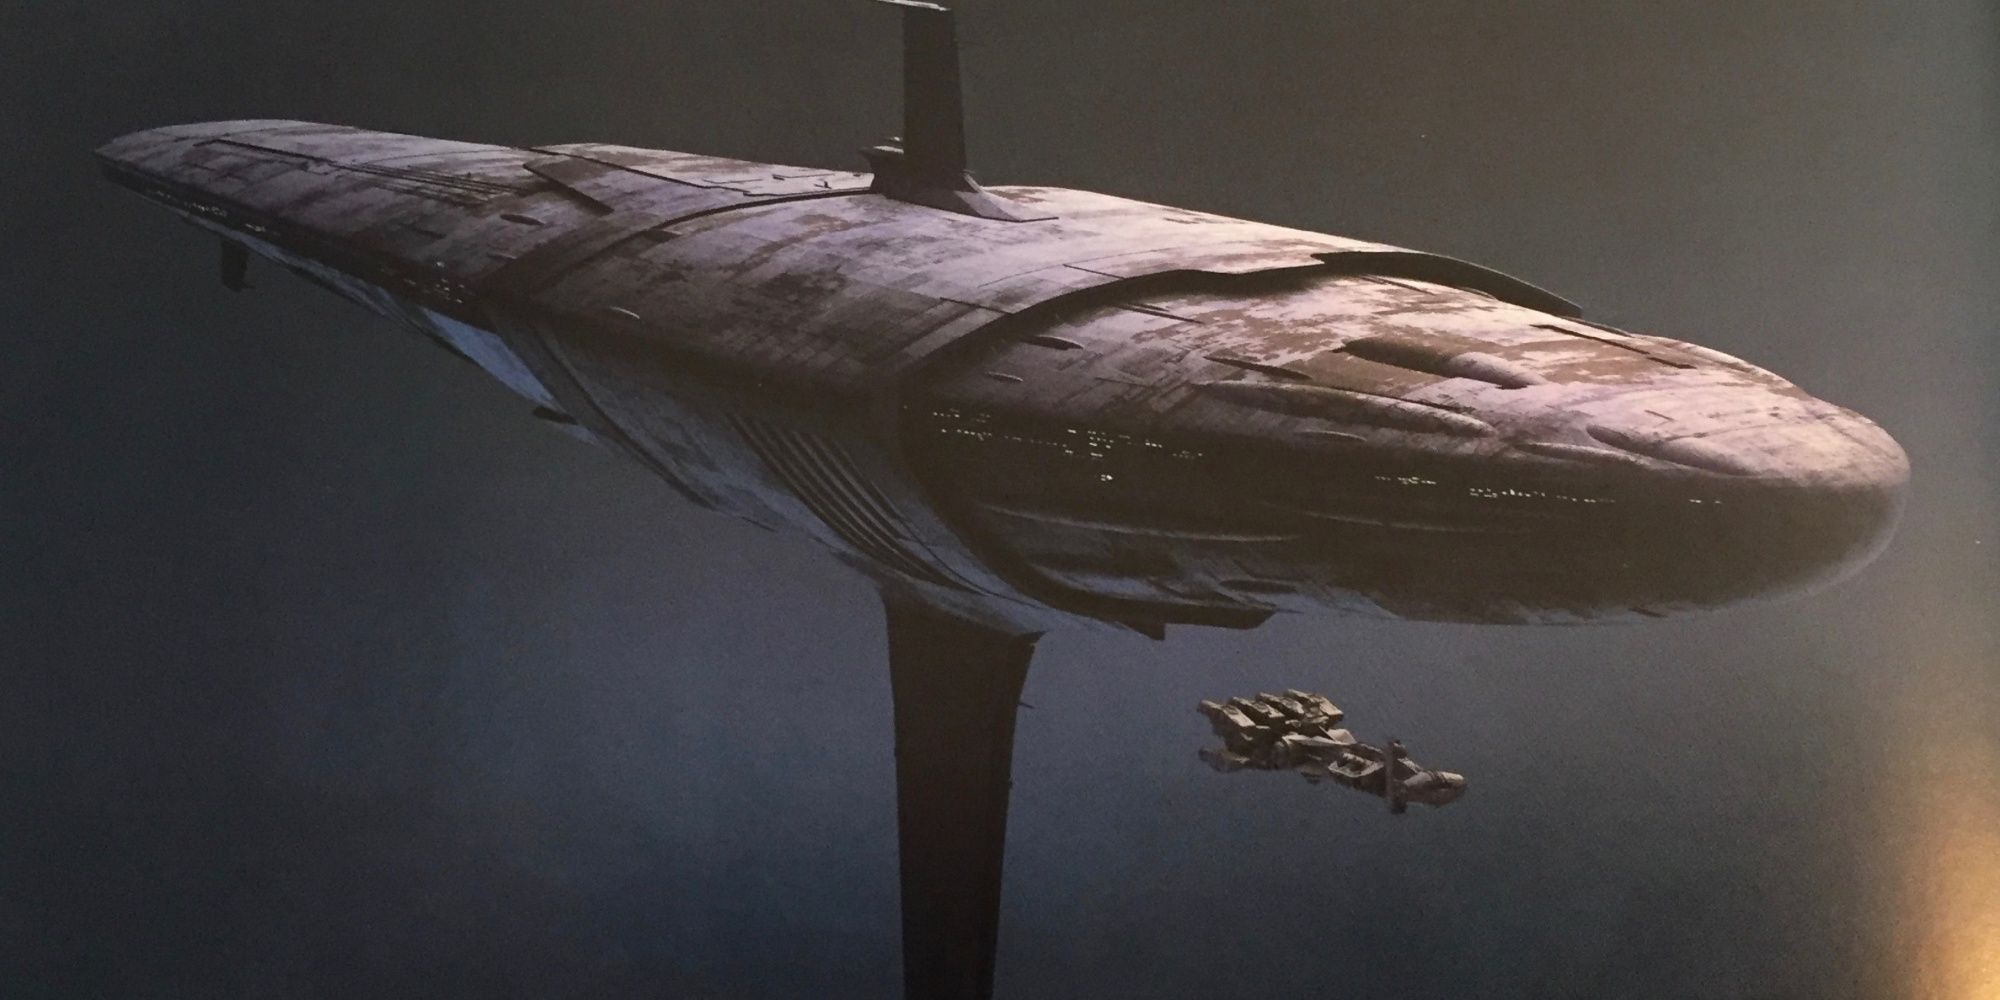 Karkana class command ship star wars RP online approved ships cropped